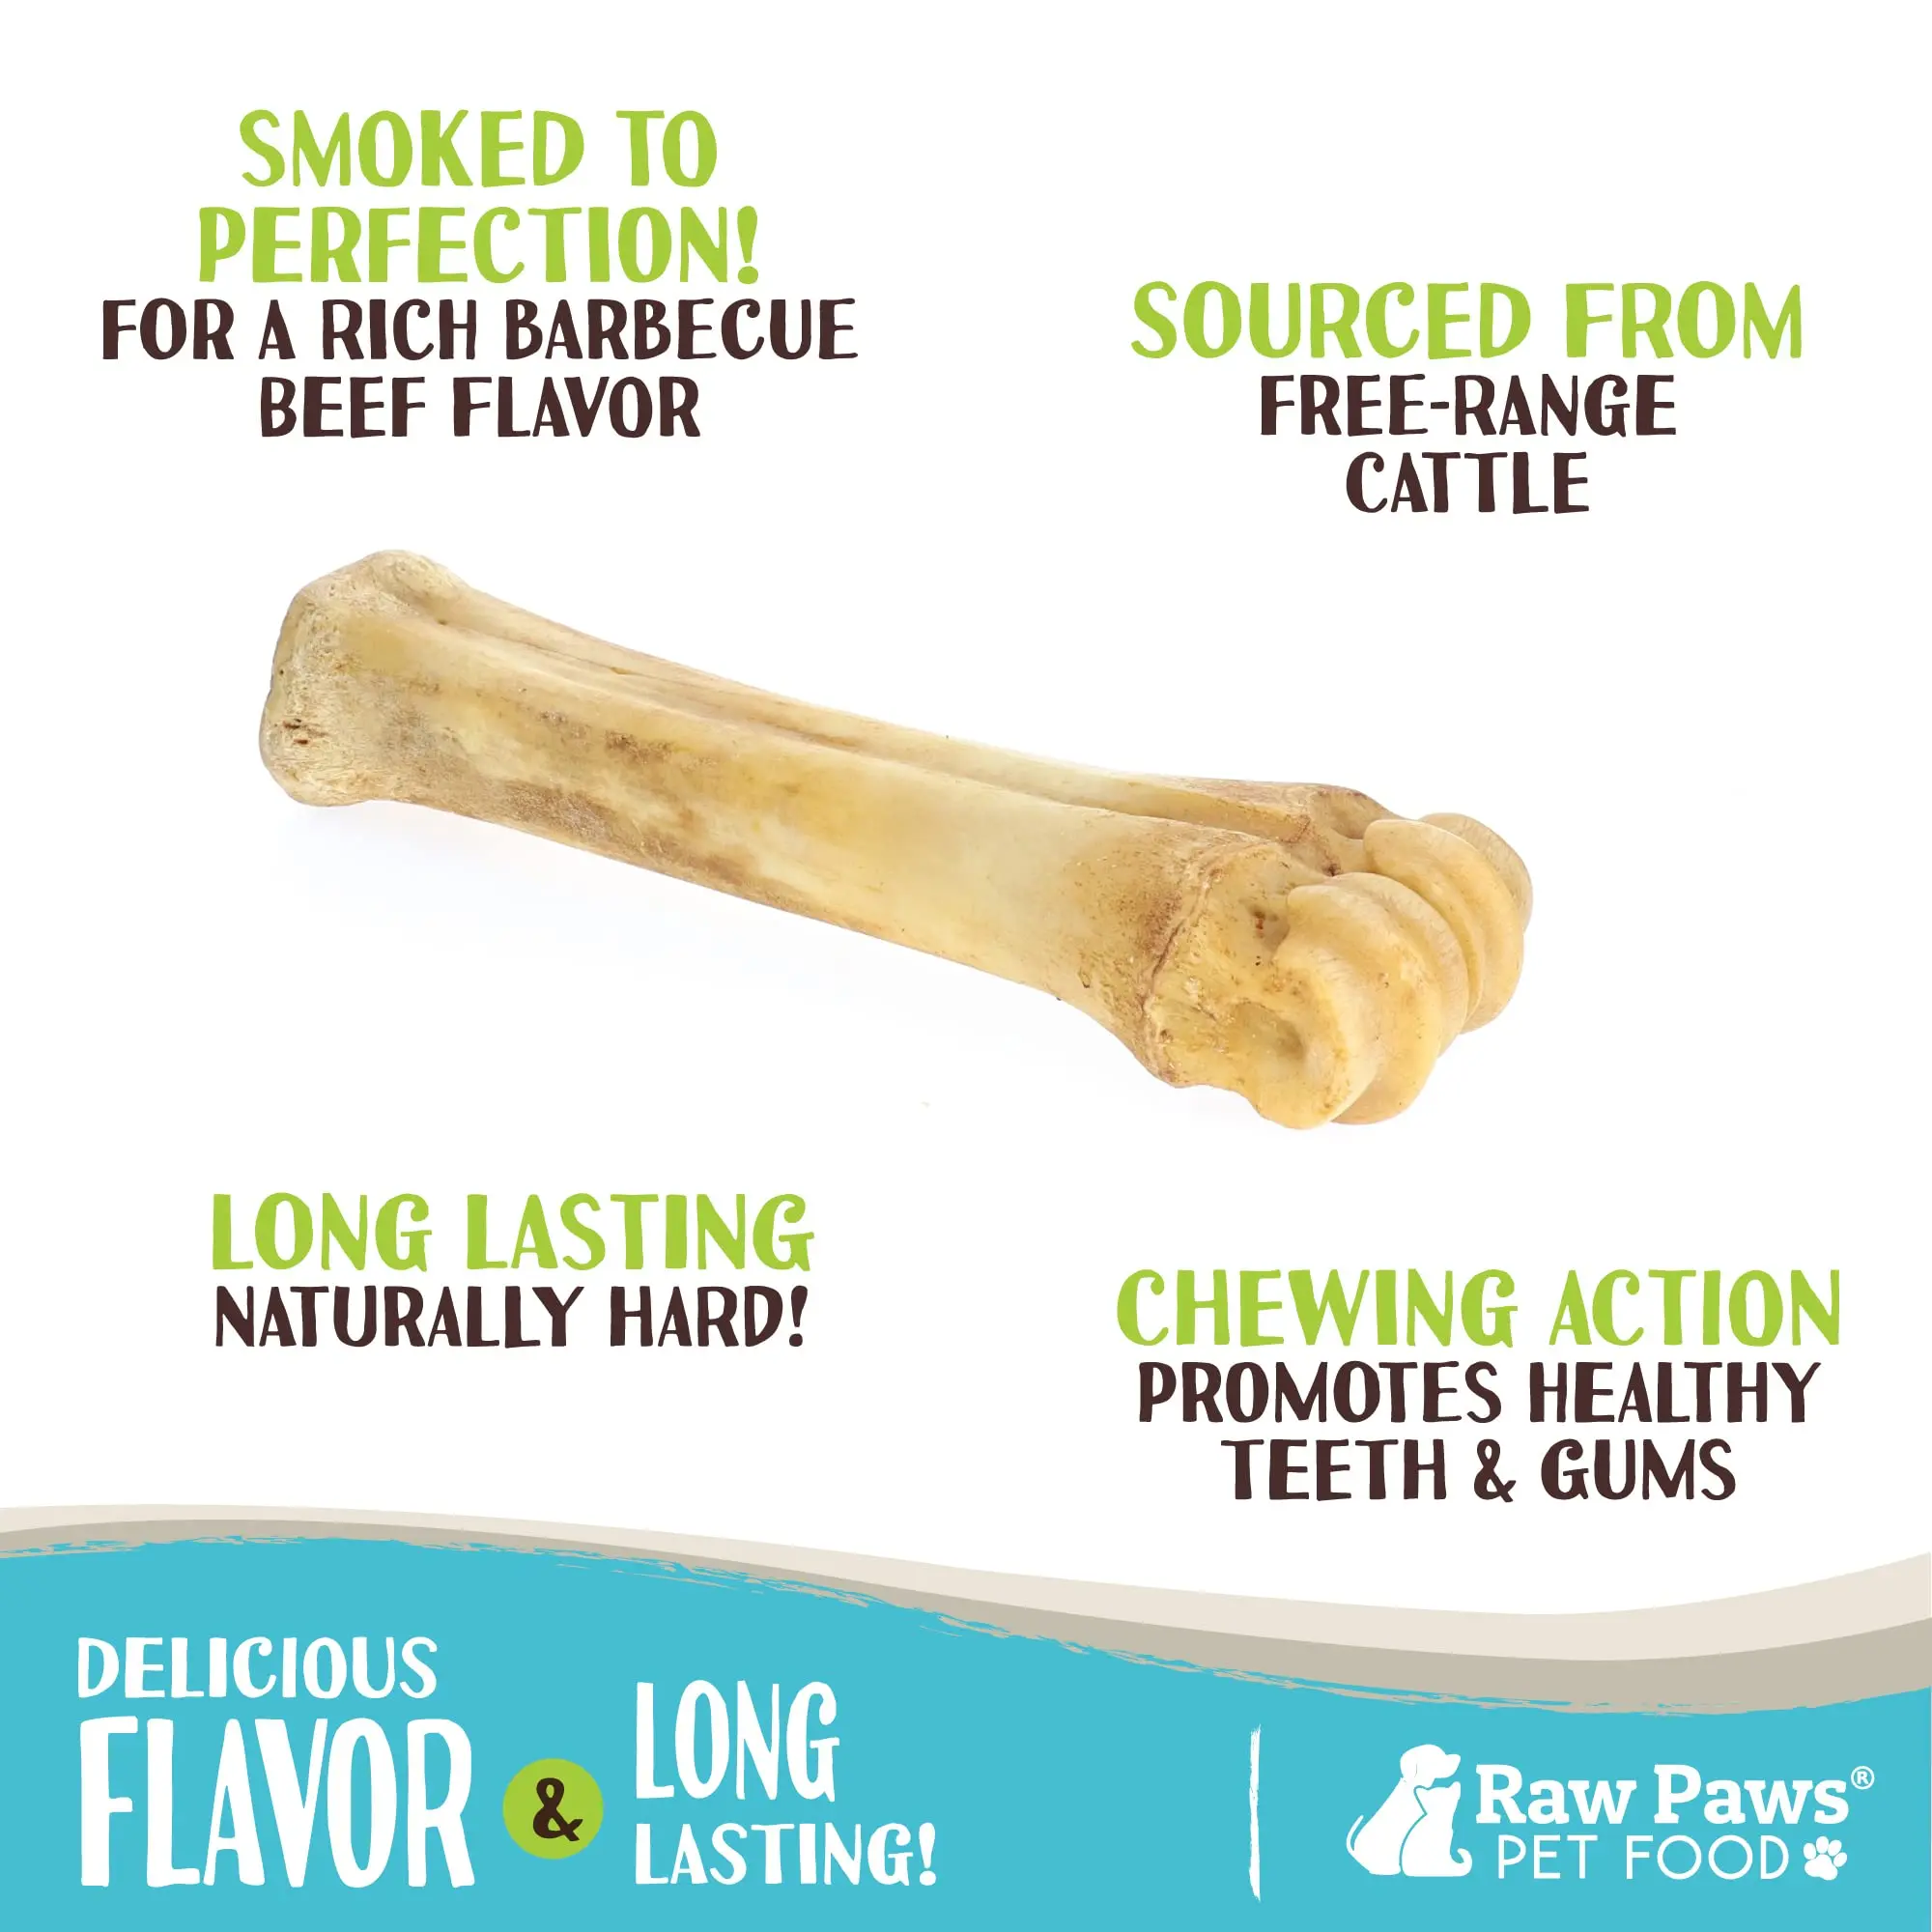 raw or smoked bones for dogs - What raw dog bones do vets recommend